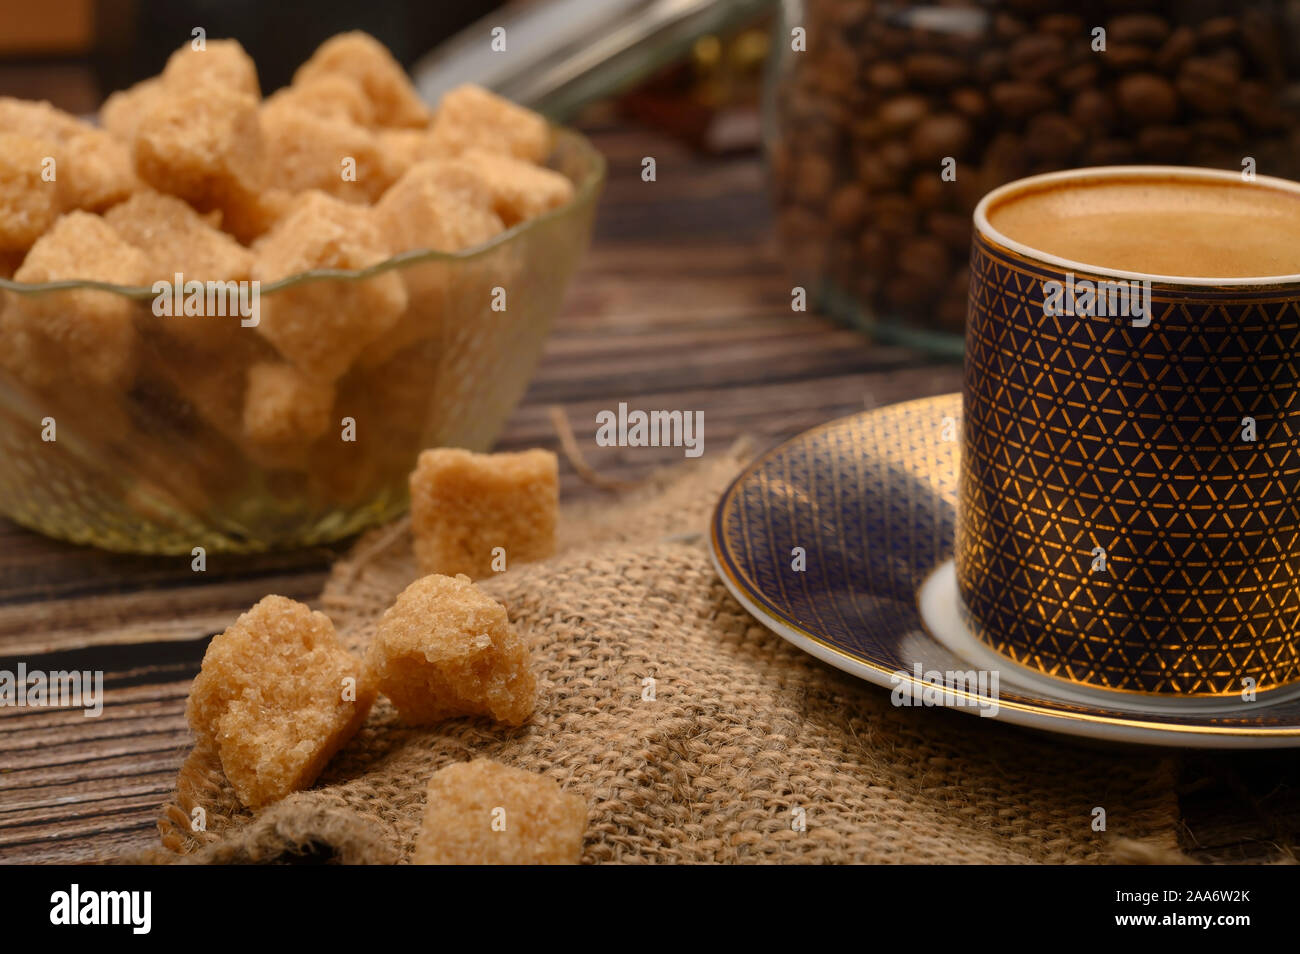 Pieces of brown sugar in a sugar bowl, a Cup of coffee, coffee beans on a wooden background. Close up Stock Photo